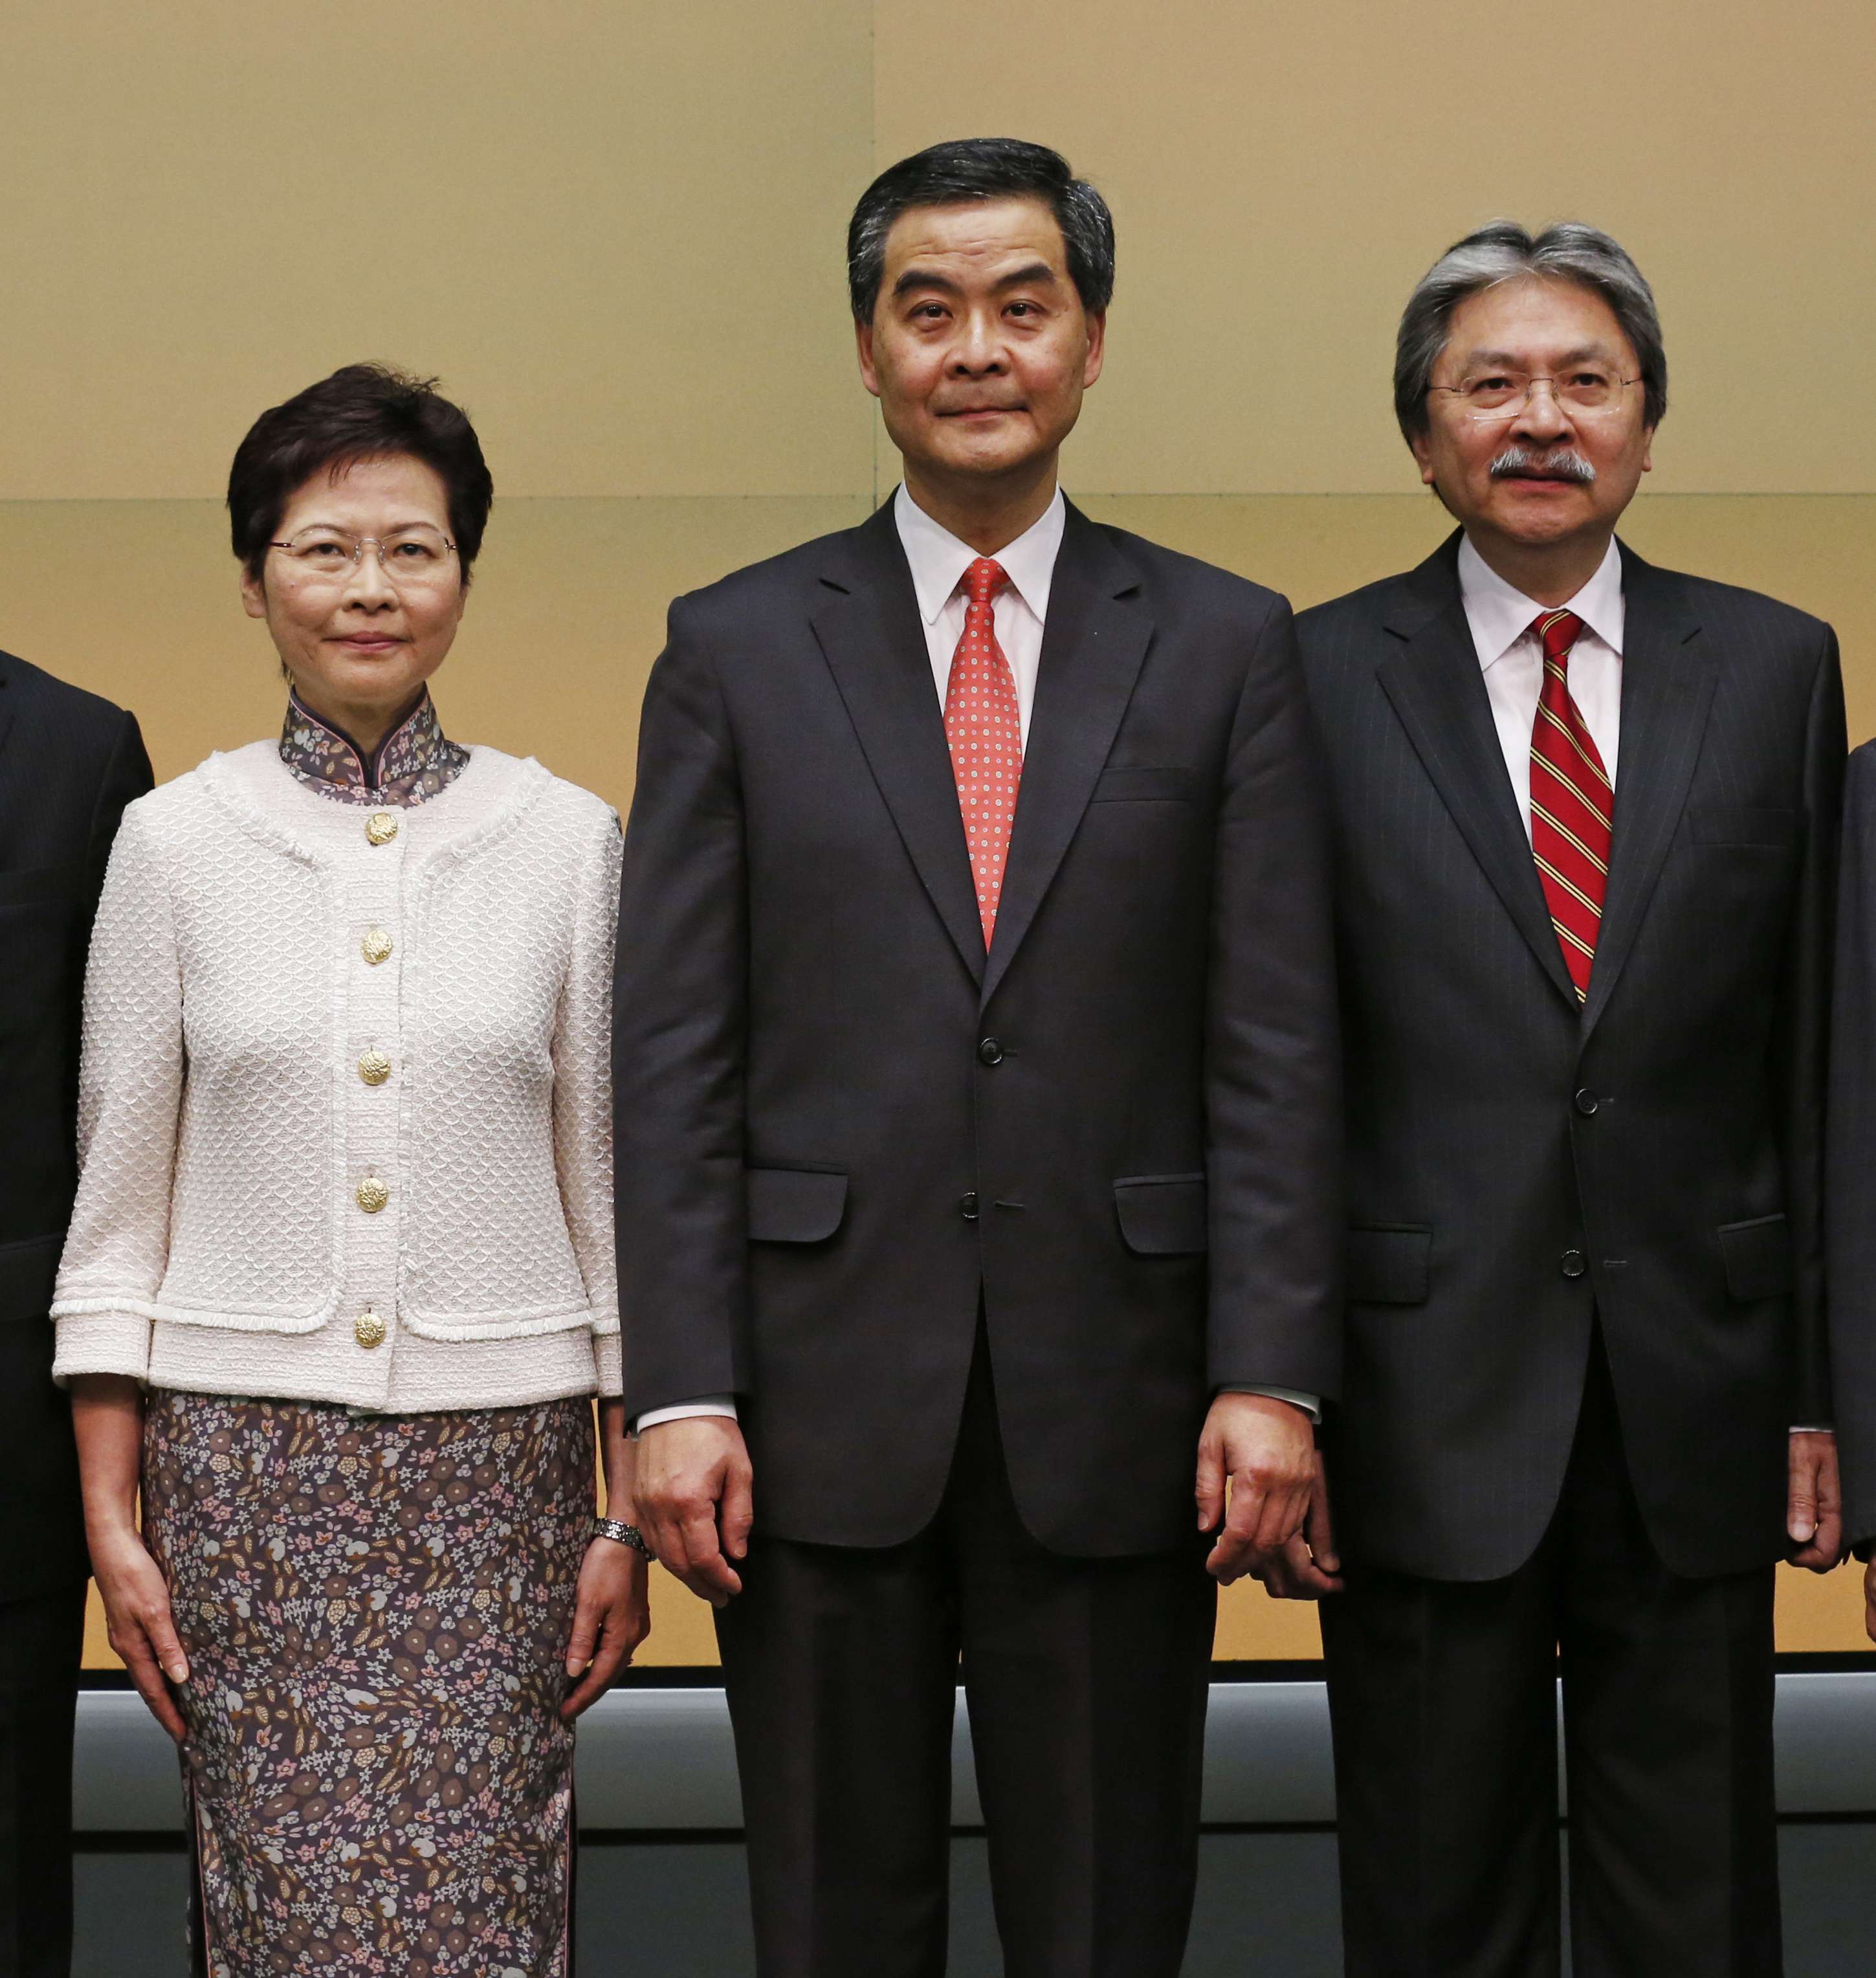 Carrie Lam appears to have an edge over John Tsang in the race to succeed Chief Executive Leung Chun-ying. Photo: AP